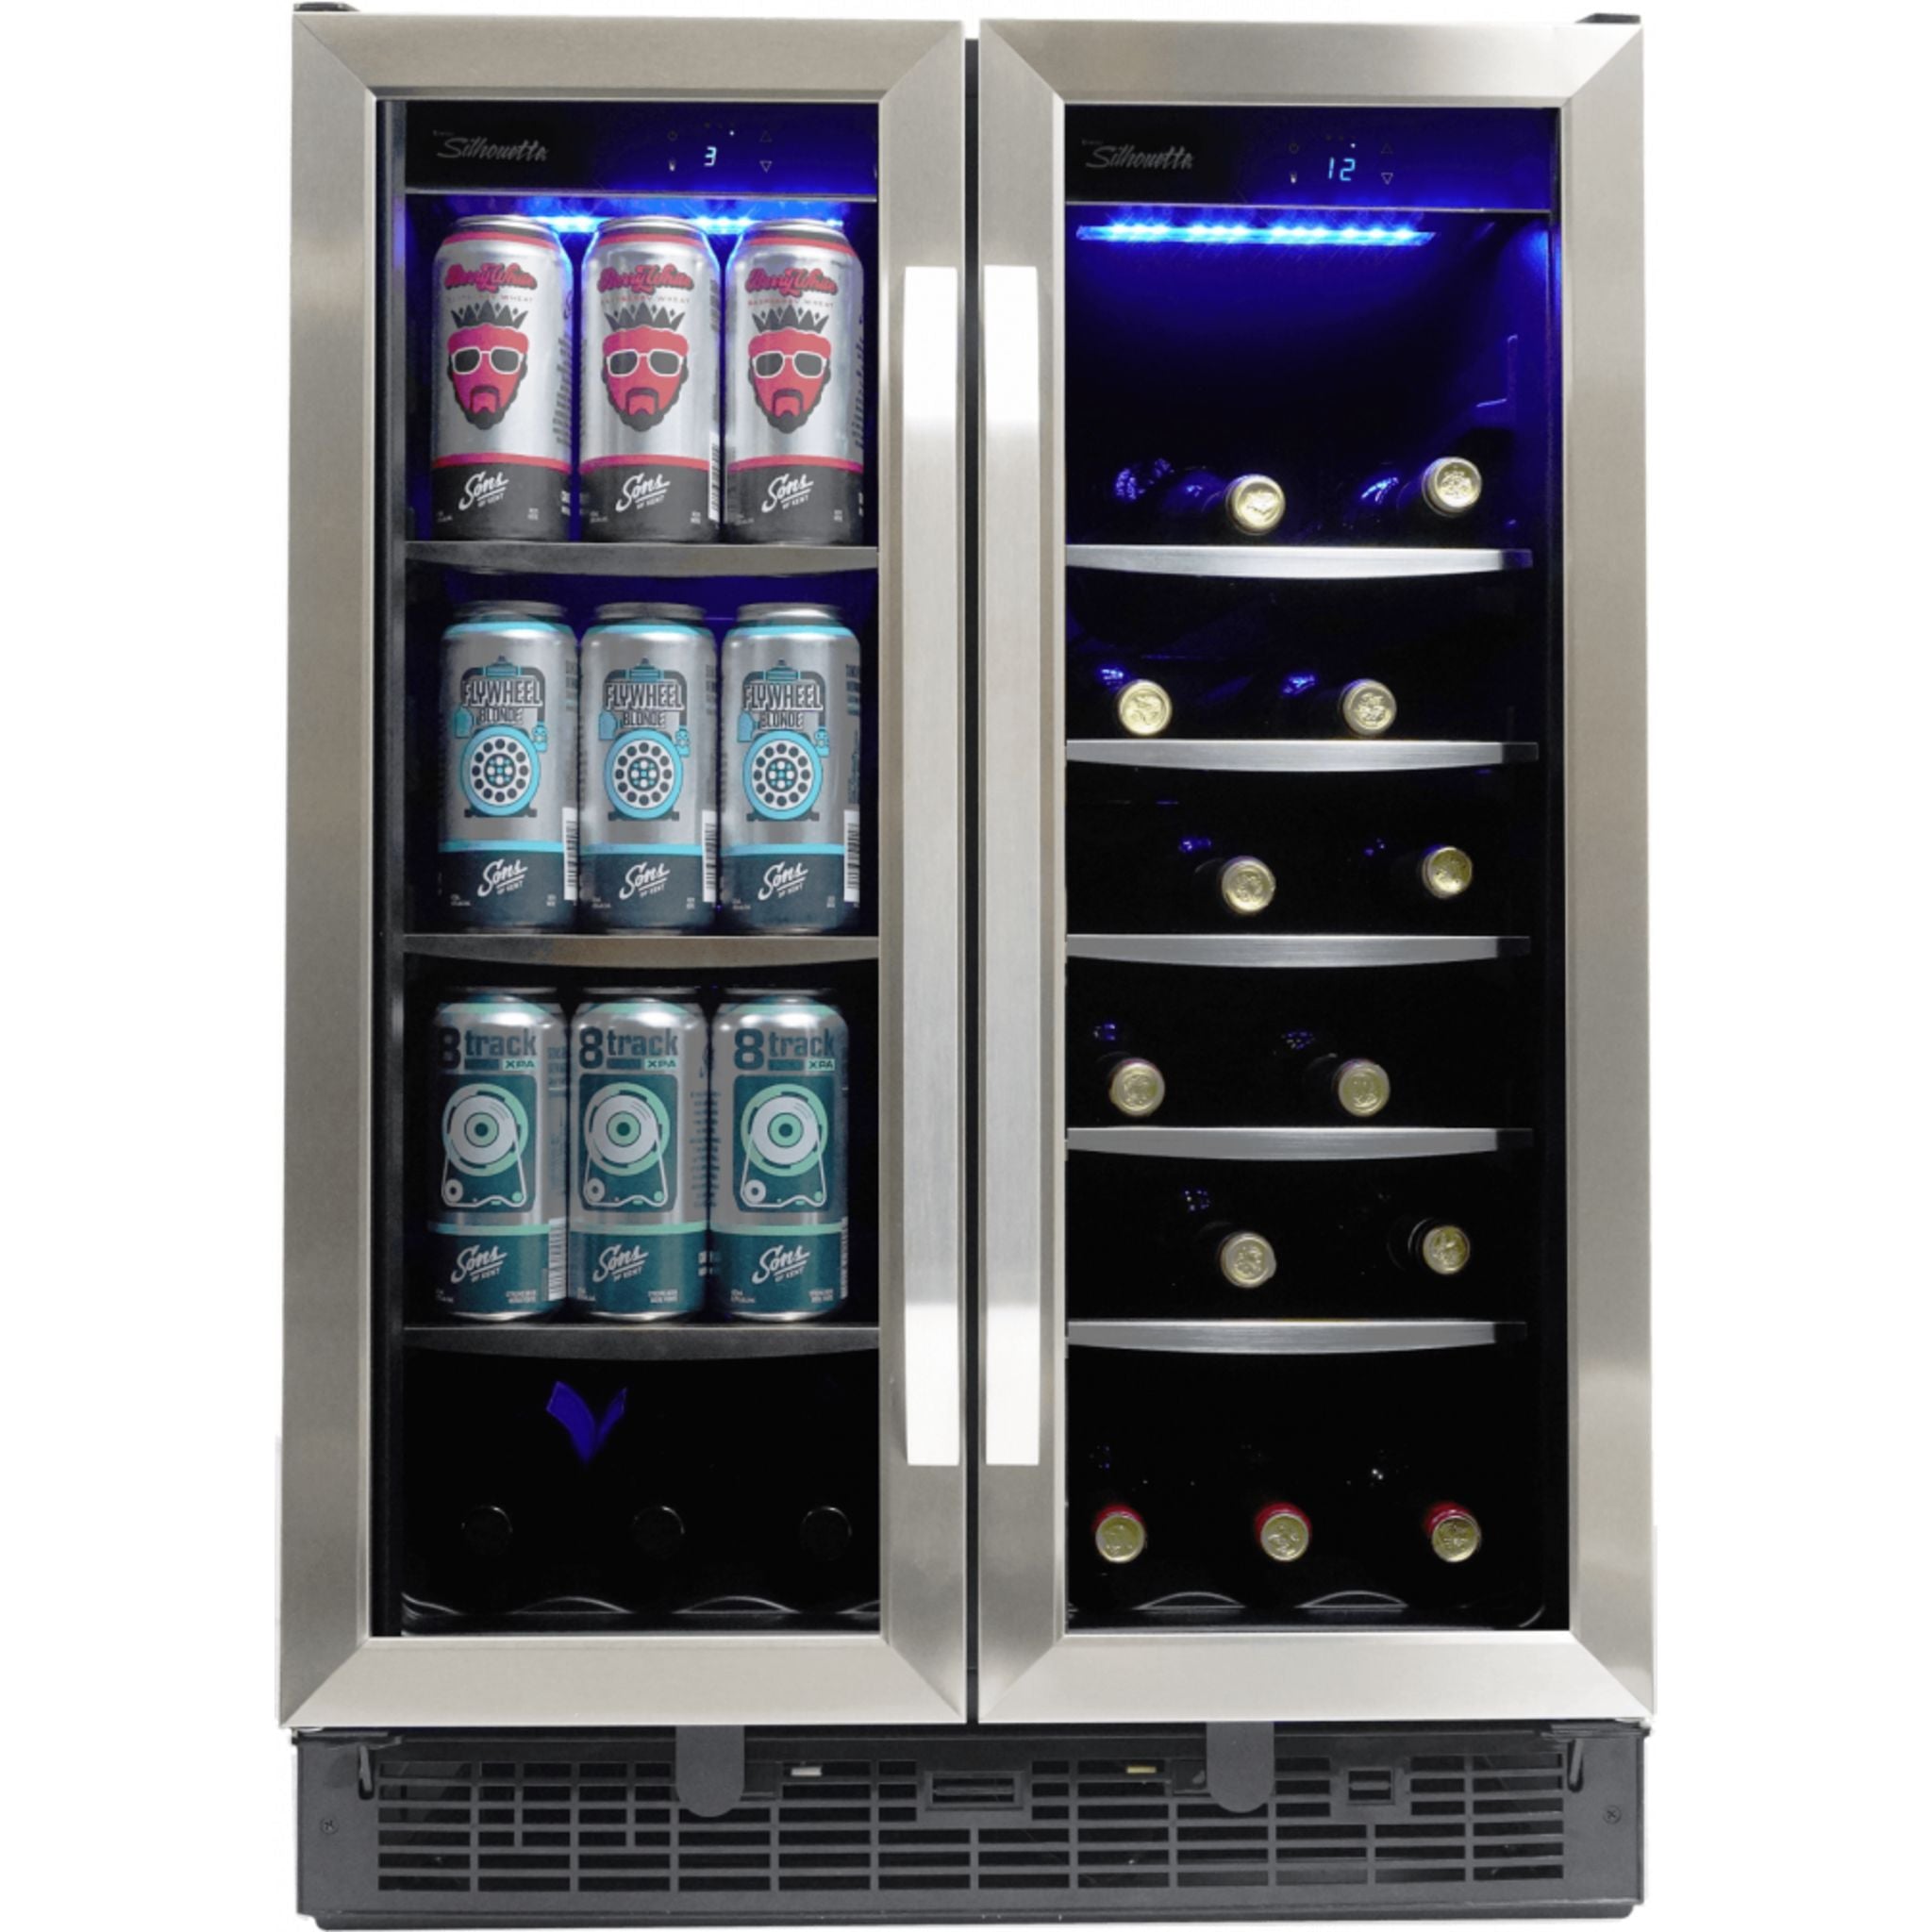 Danby, Danby-Silhouette Beverage Cooler (SBC051D1BSS) - Stainless Steel